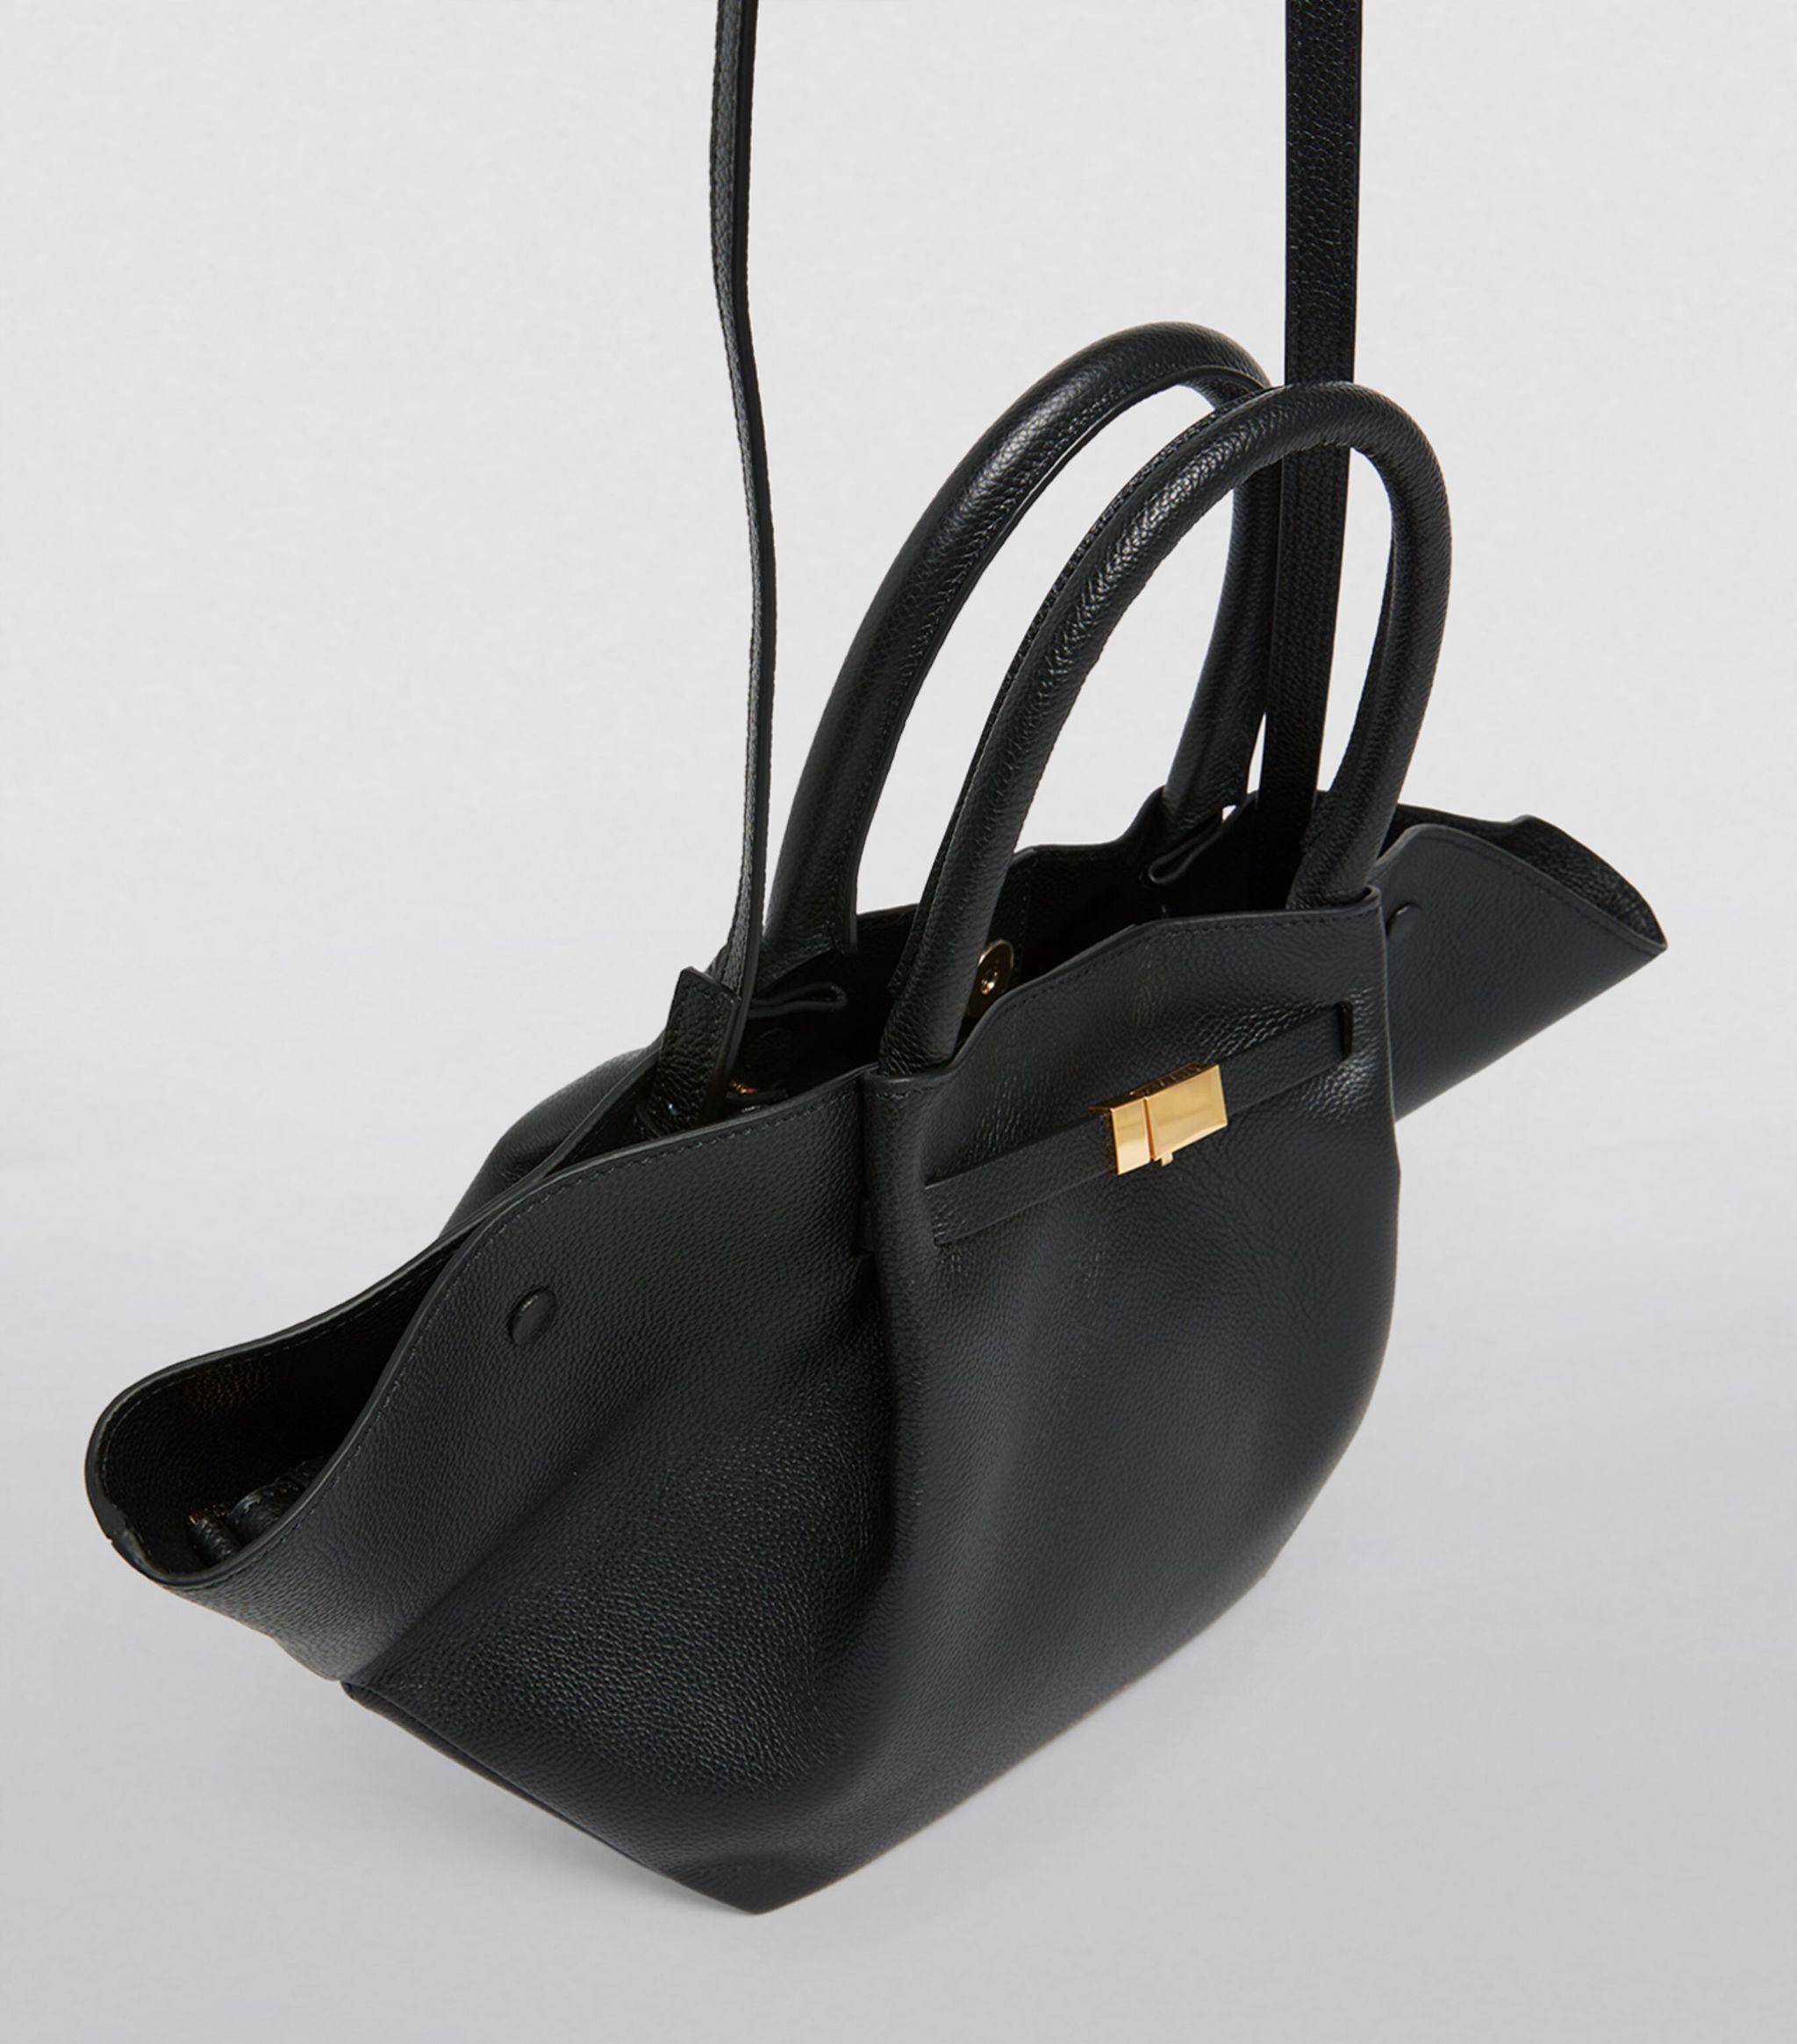 Demellier New York Leather Tote Bag